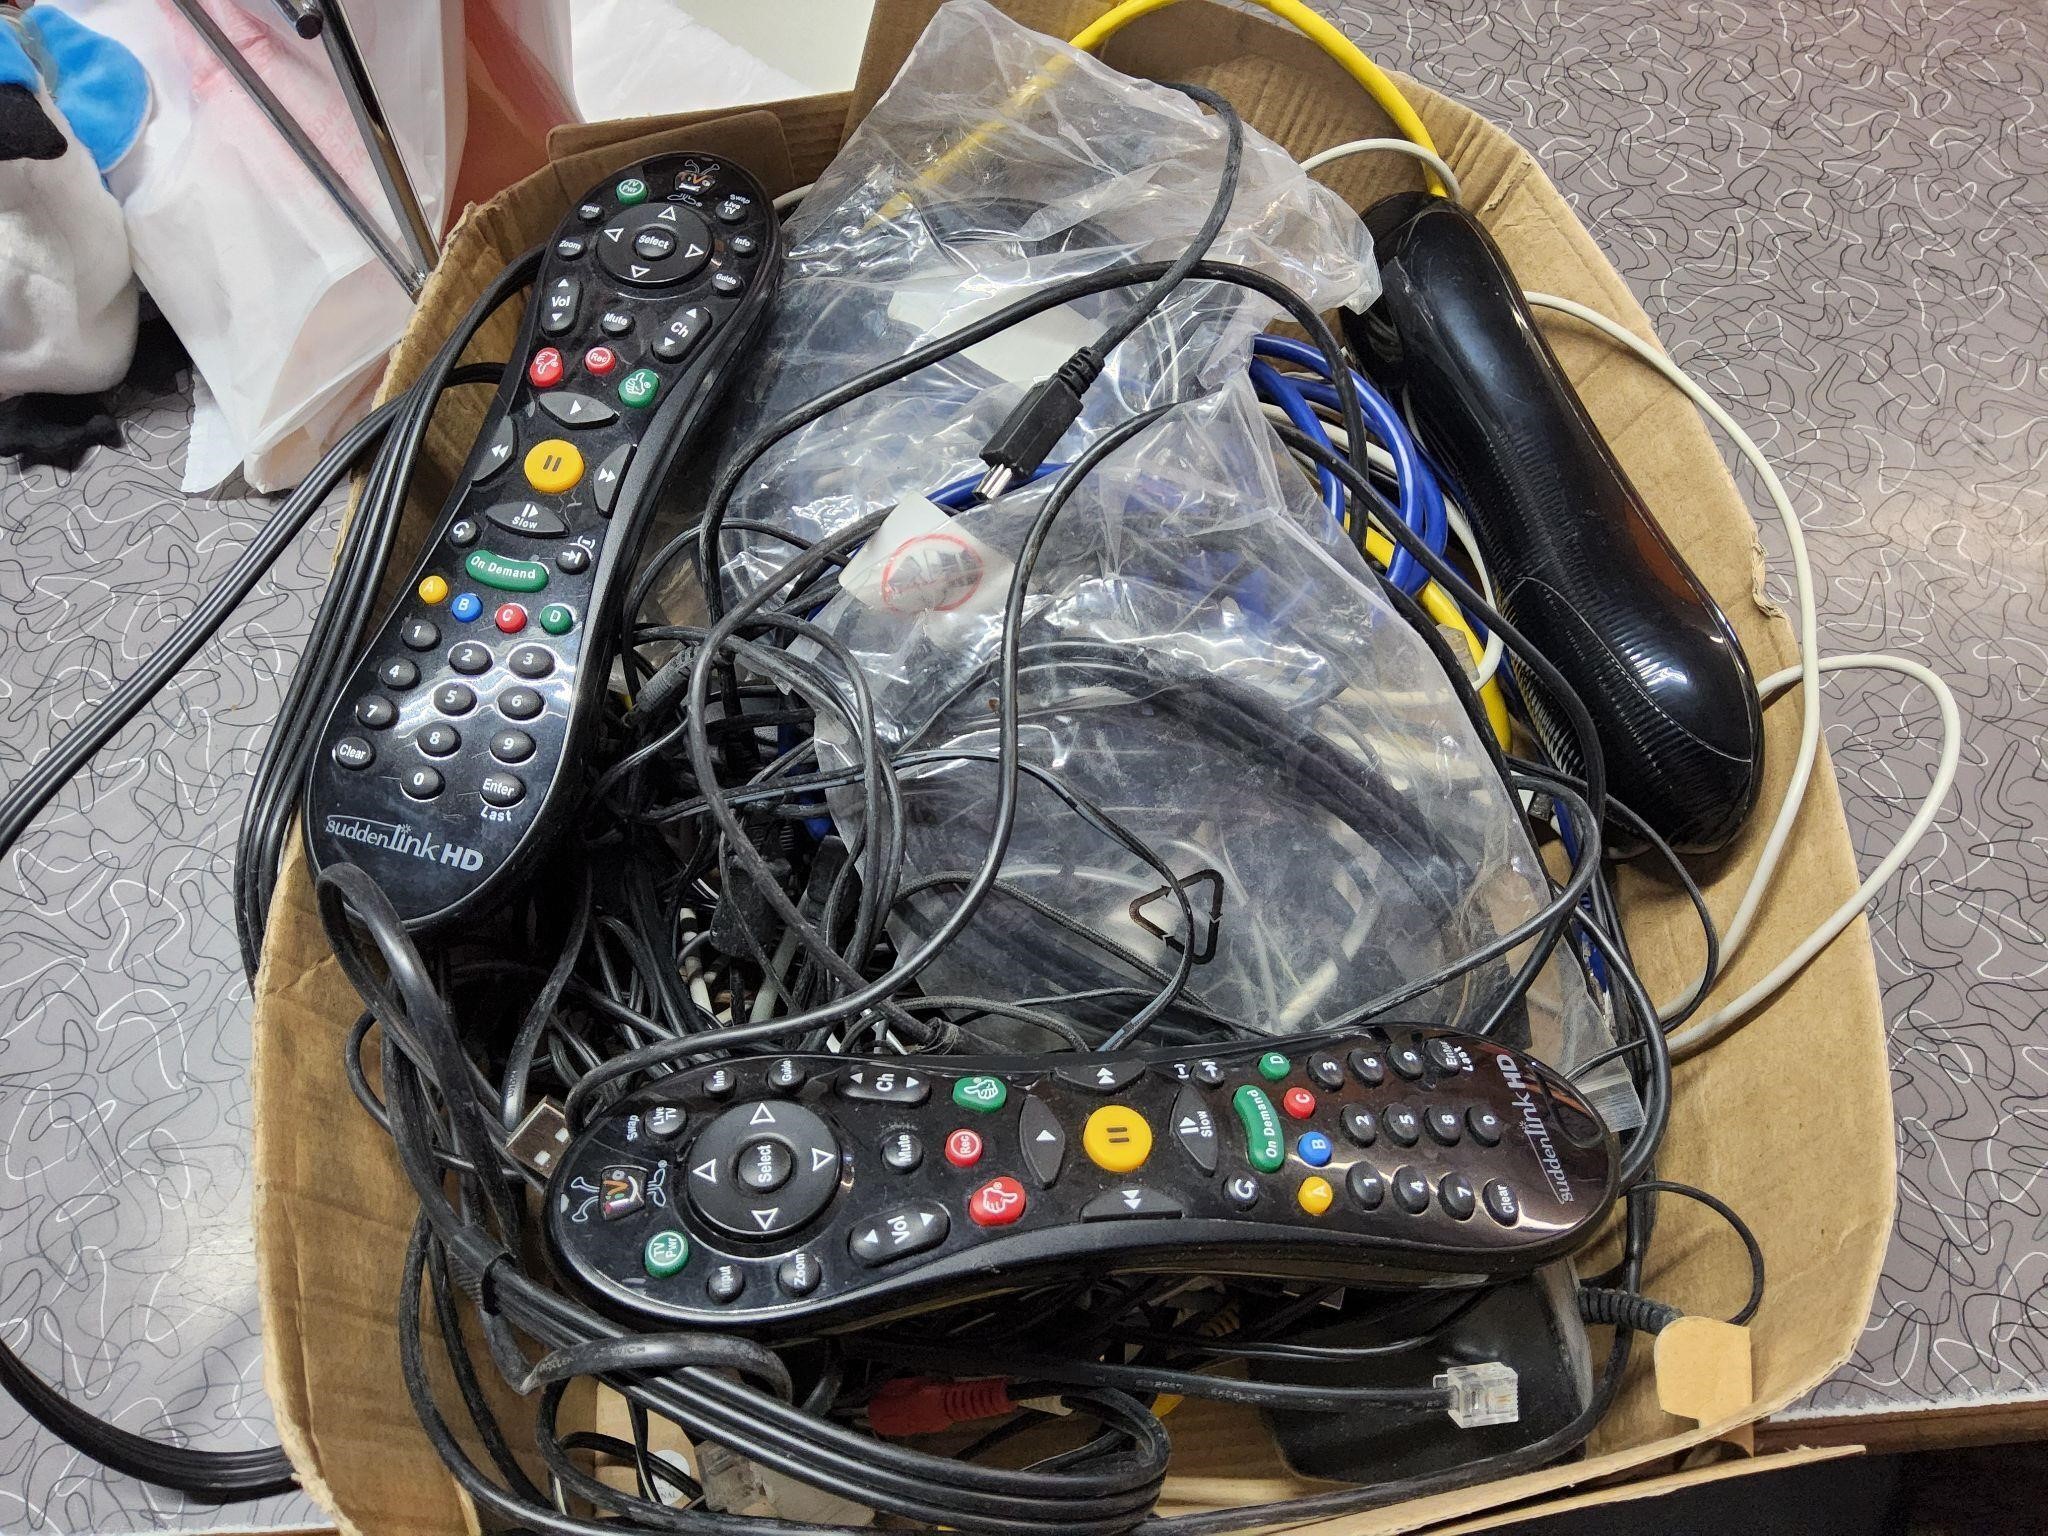 suddenlink controllers and a bunch of cords